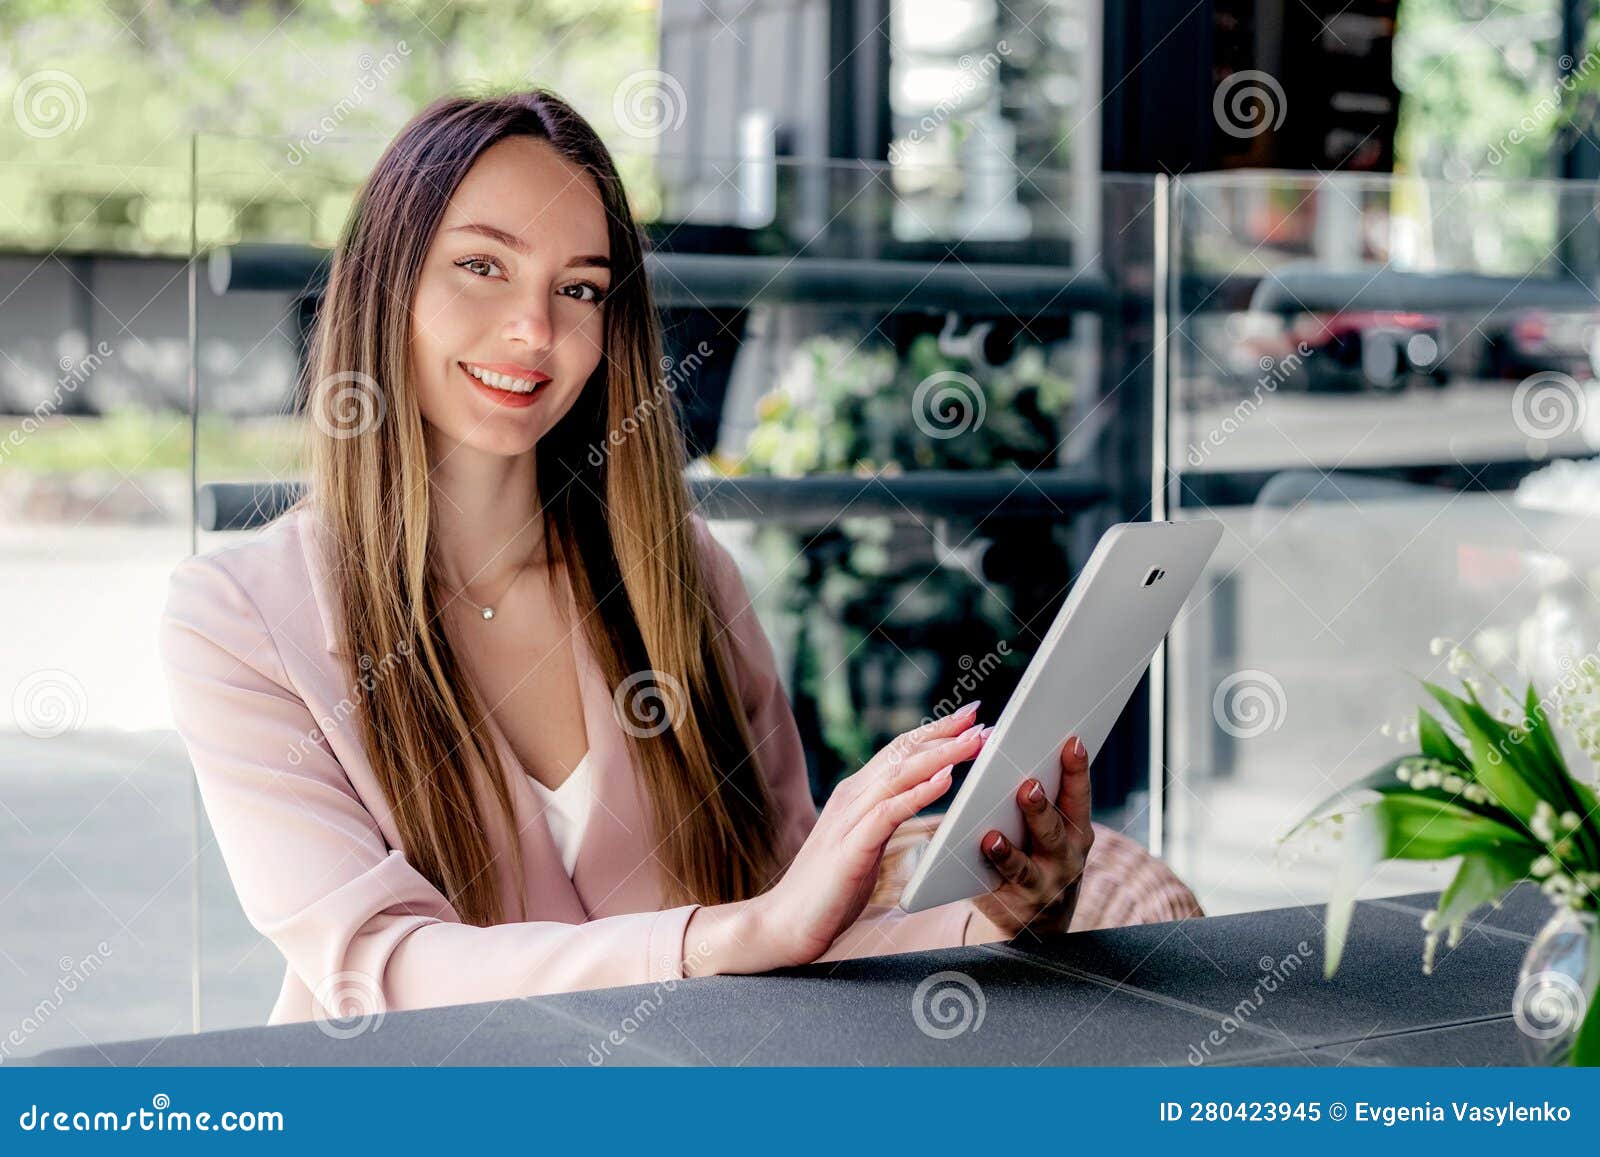 beautiful young woman using digital tablet at cafe